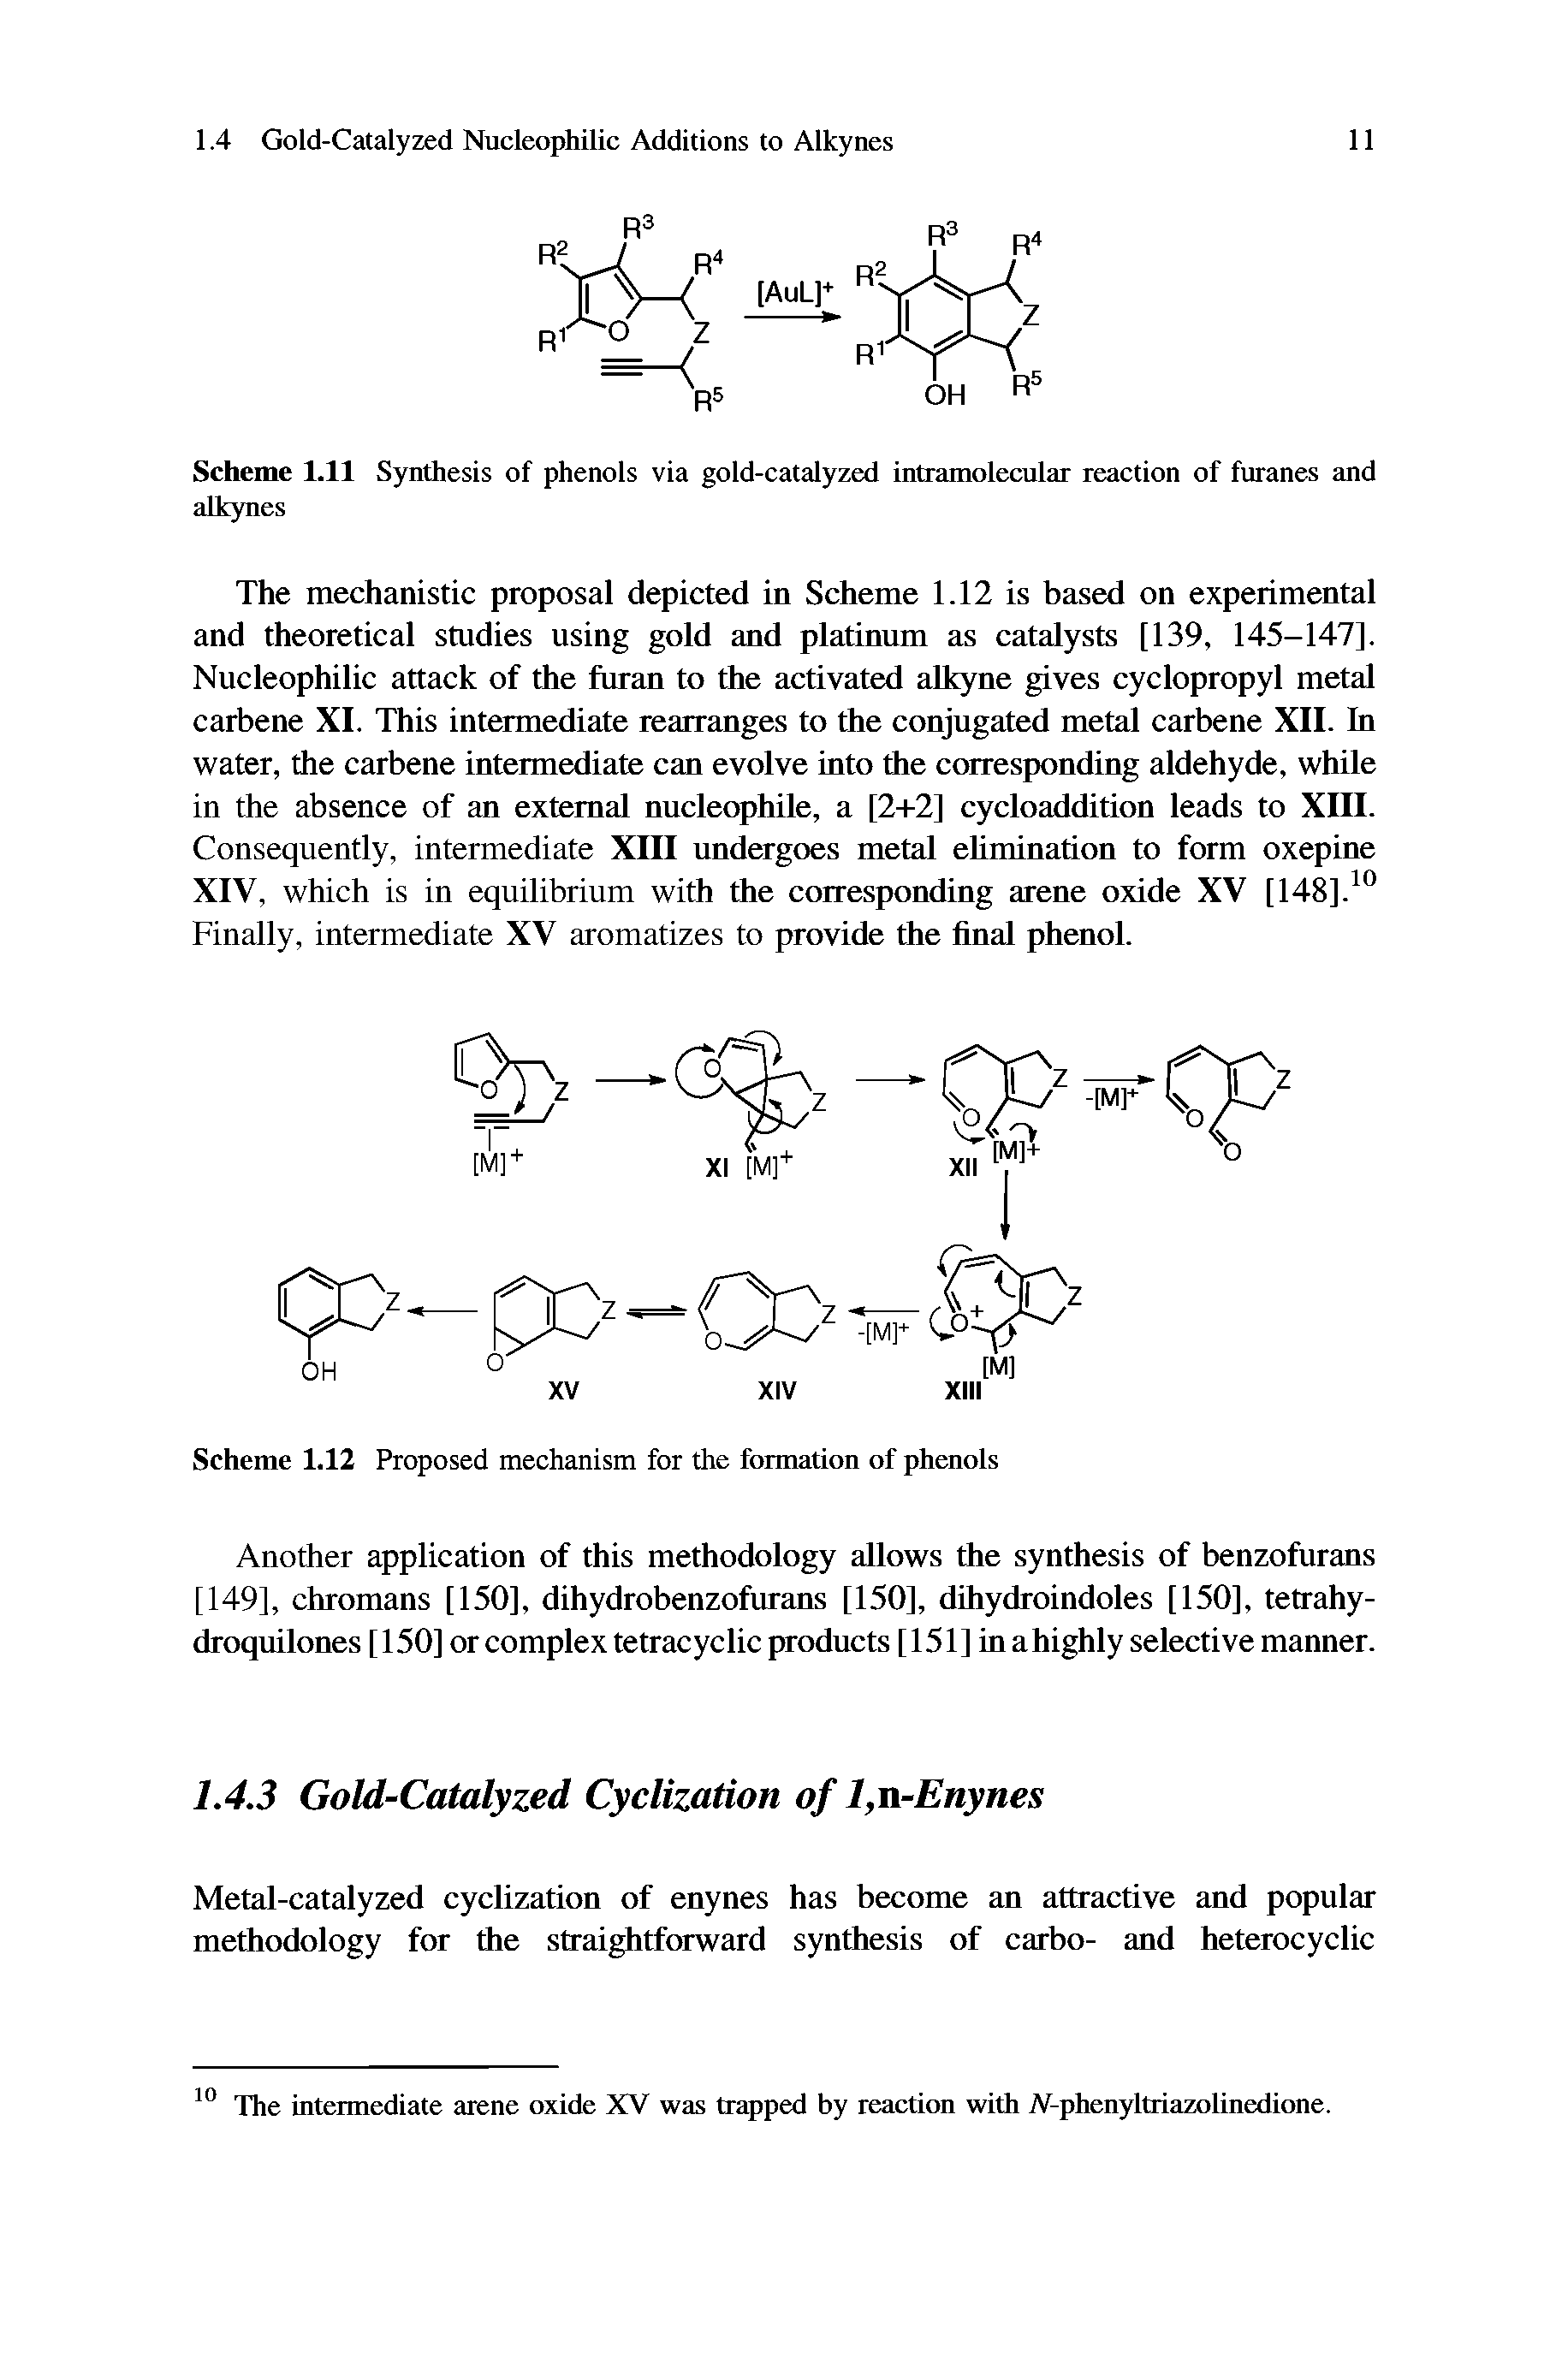 Scheme 1.11 Synthesis of phenols via gold-catalyzed intramolecular reaction of furanes and alkynes...